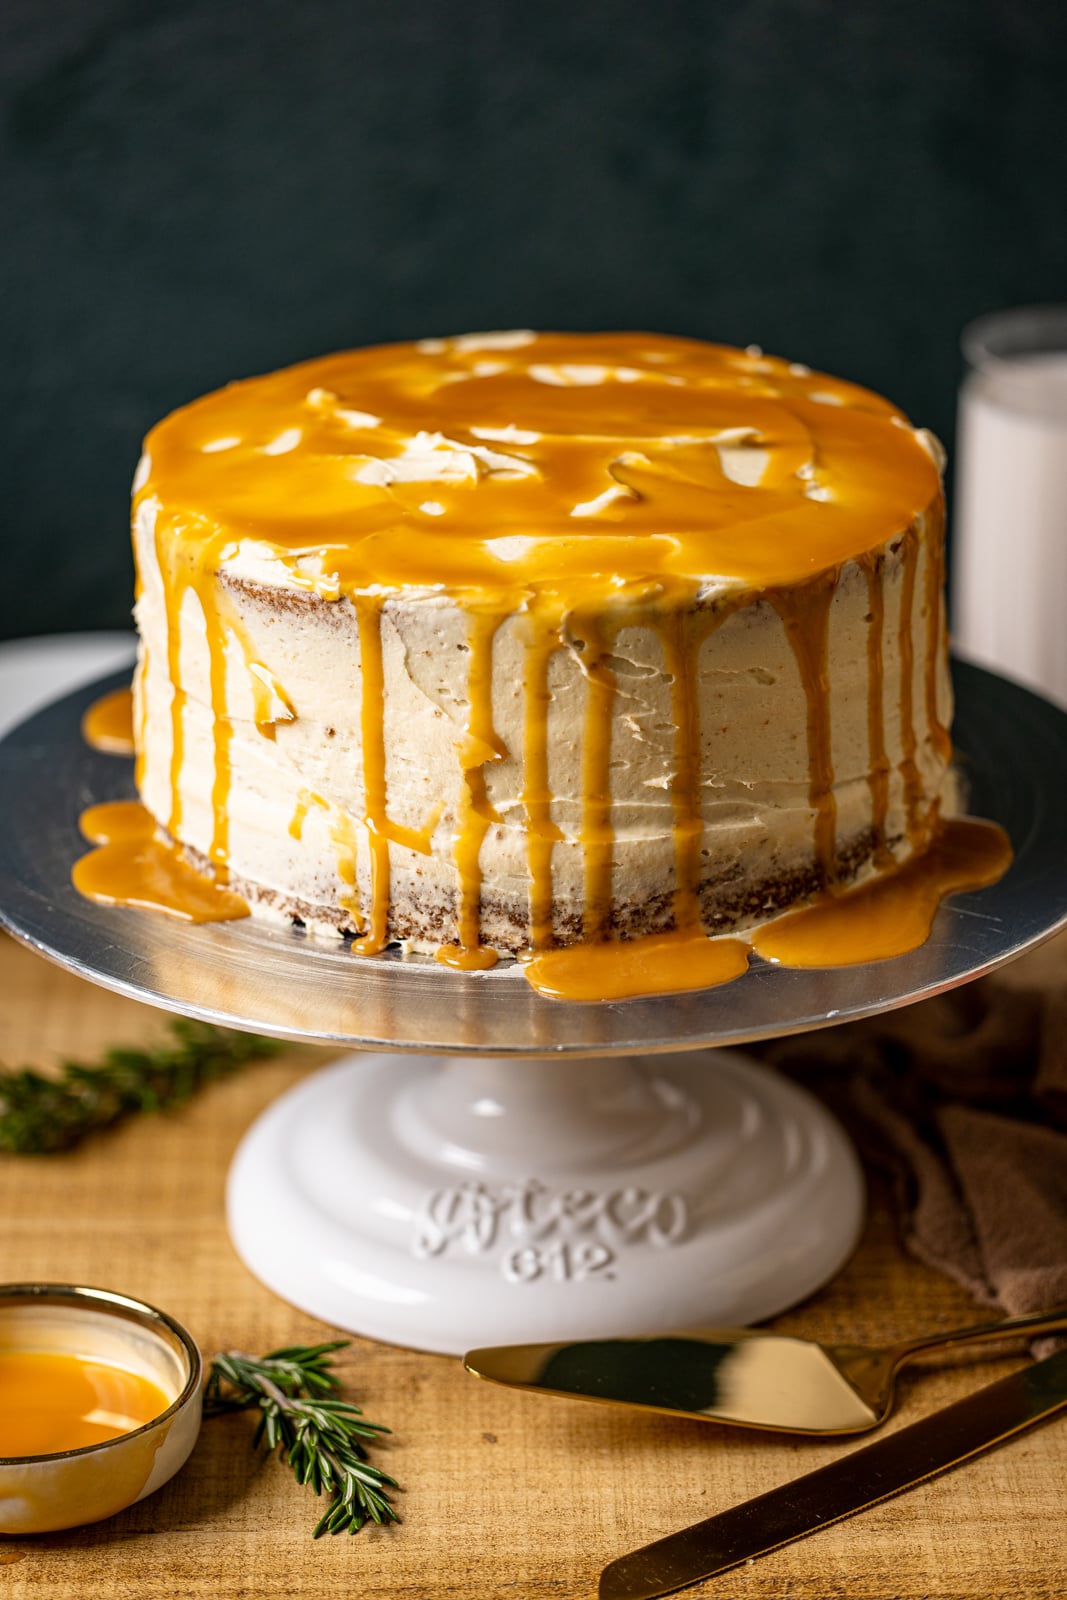 To view of fully frosted cake with drips of salted caramel on top on a cake stand on a brown table with a dark green background.